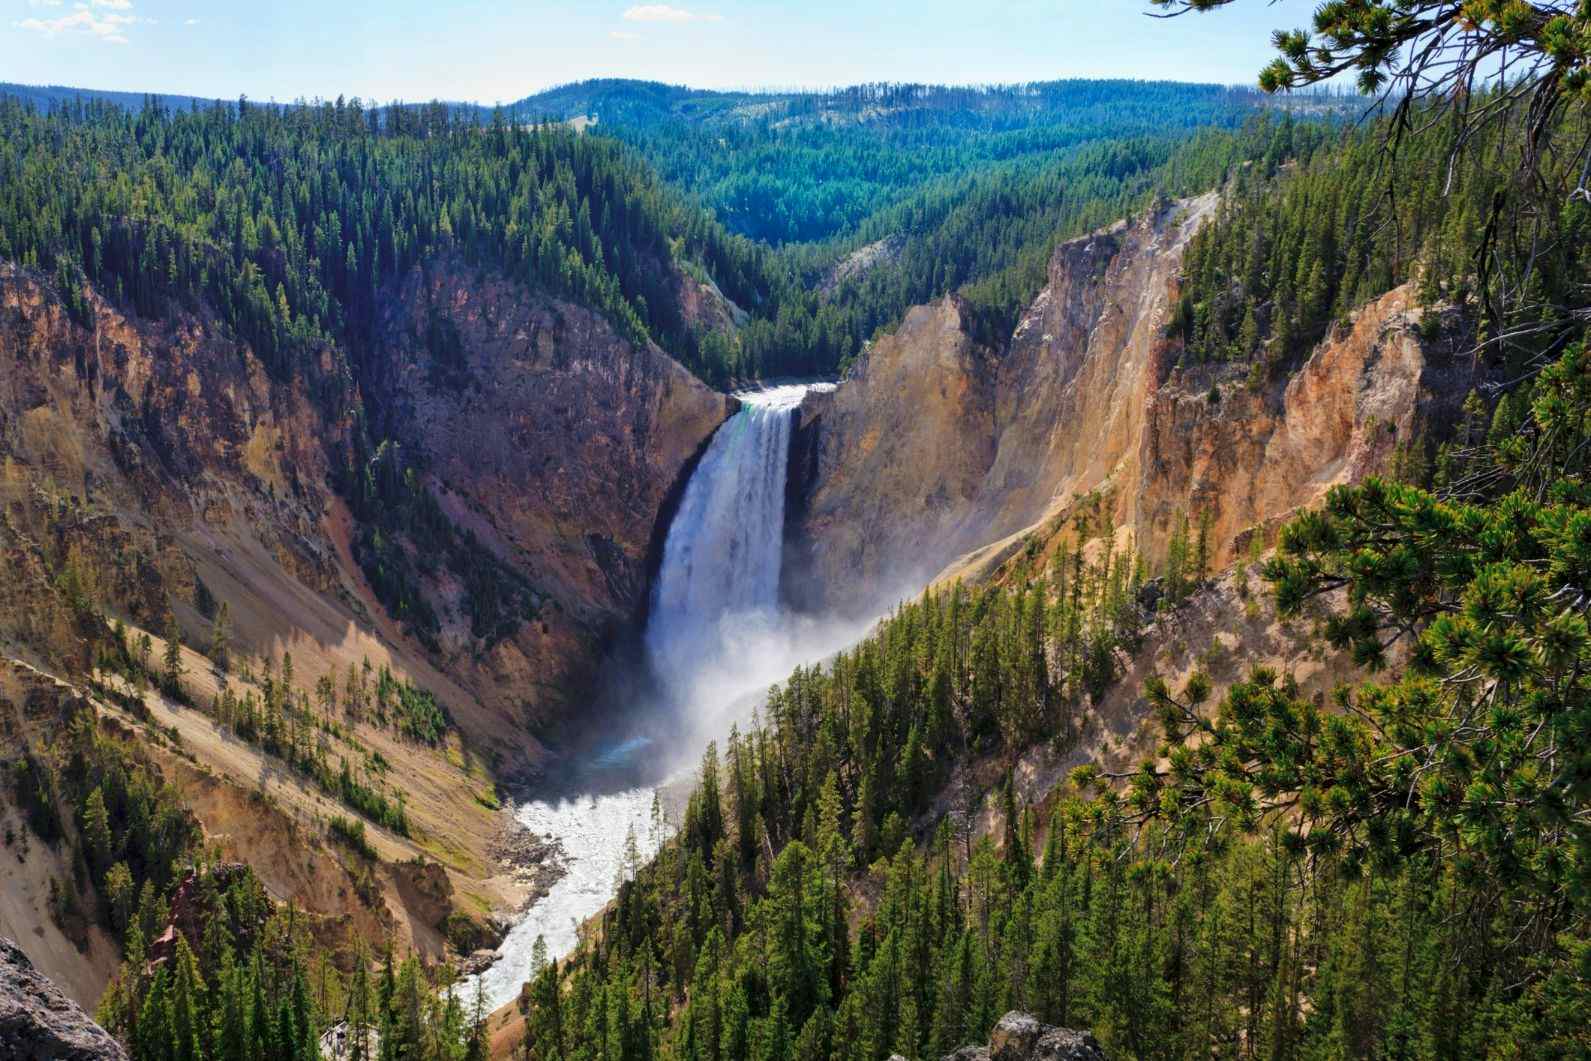  7 of the Best Day Hikes in Yellowstone National Park